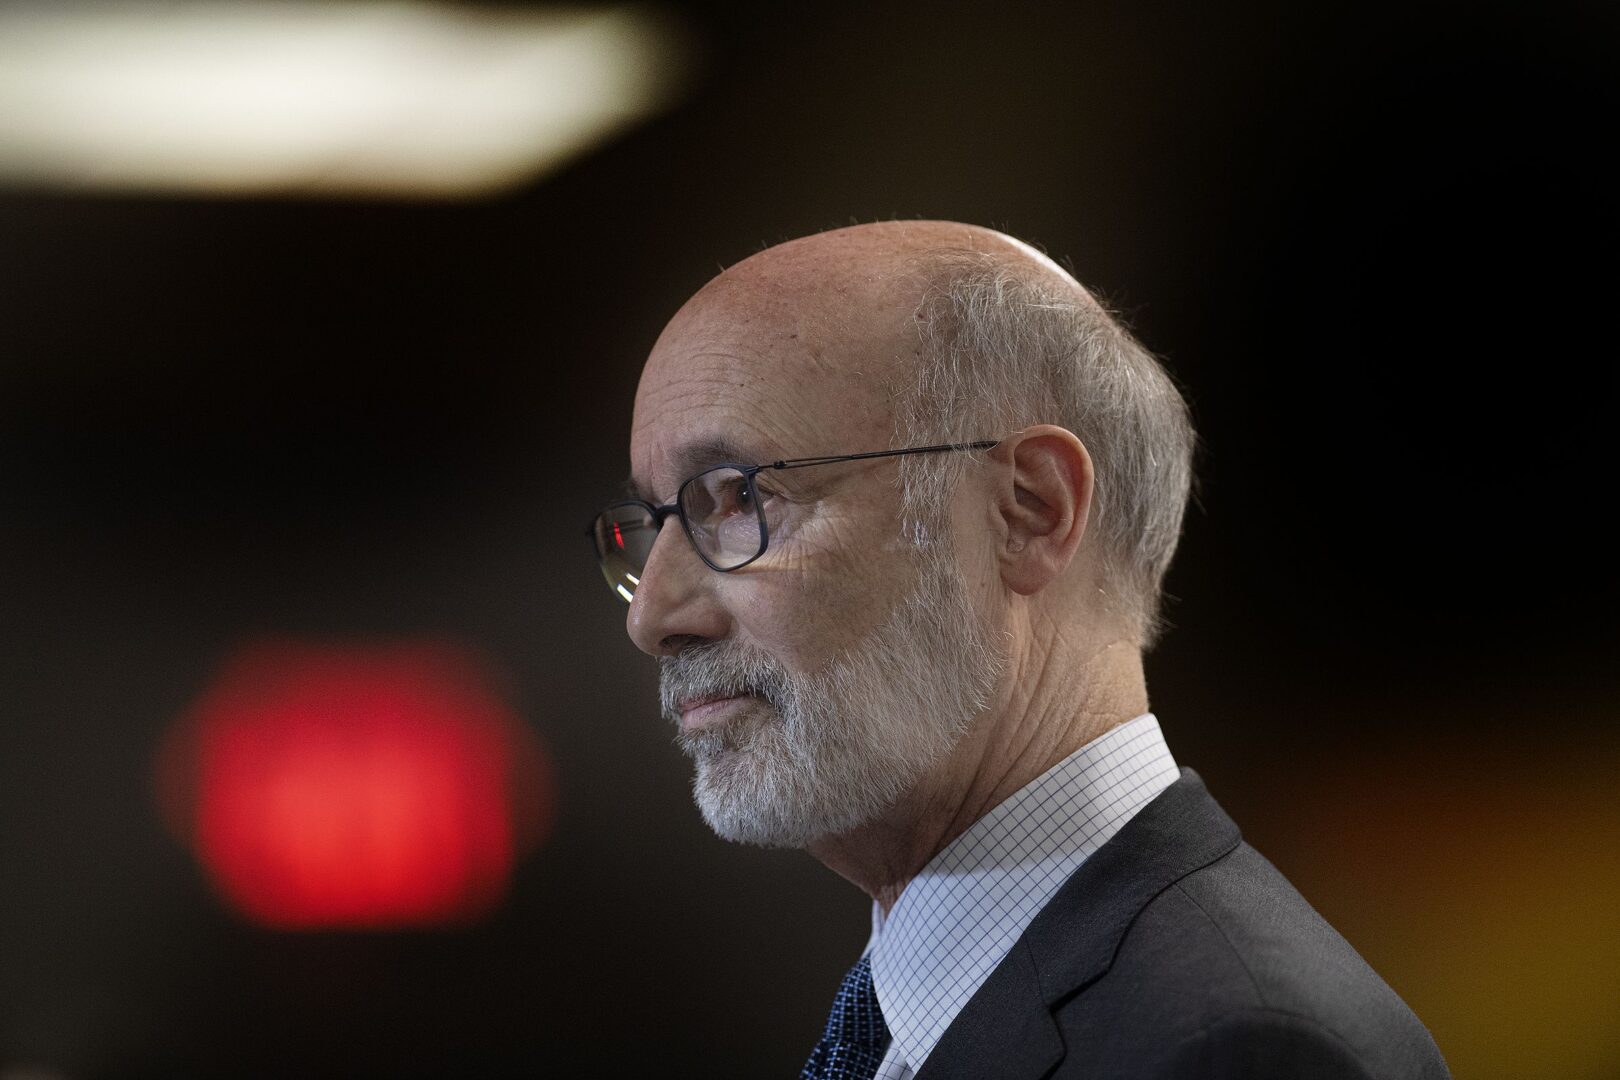 Gov. Tom Wolf has signed a $2 billion tax credit package for the hydrogen production, milk processing, and biomedical research industries into law, capping months of quiet negotiations between the Democrat and top Republicans in the General Assembly.